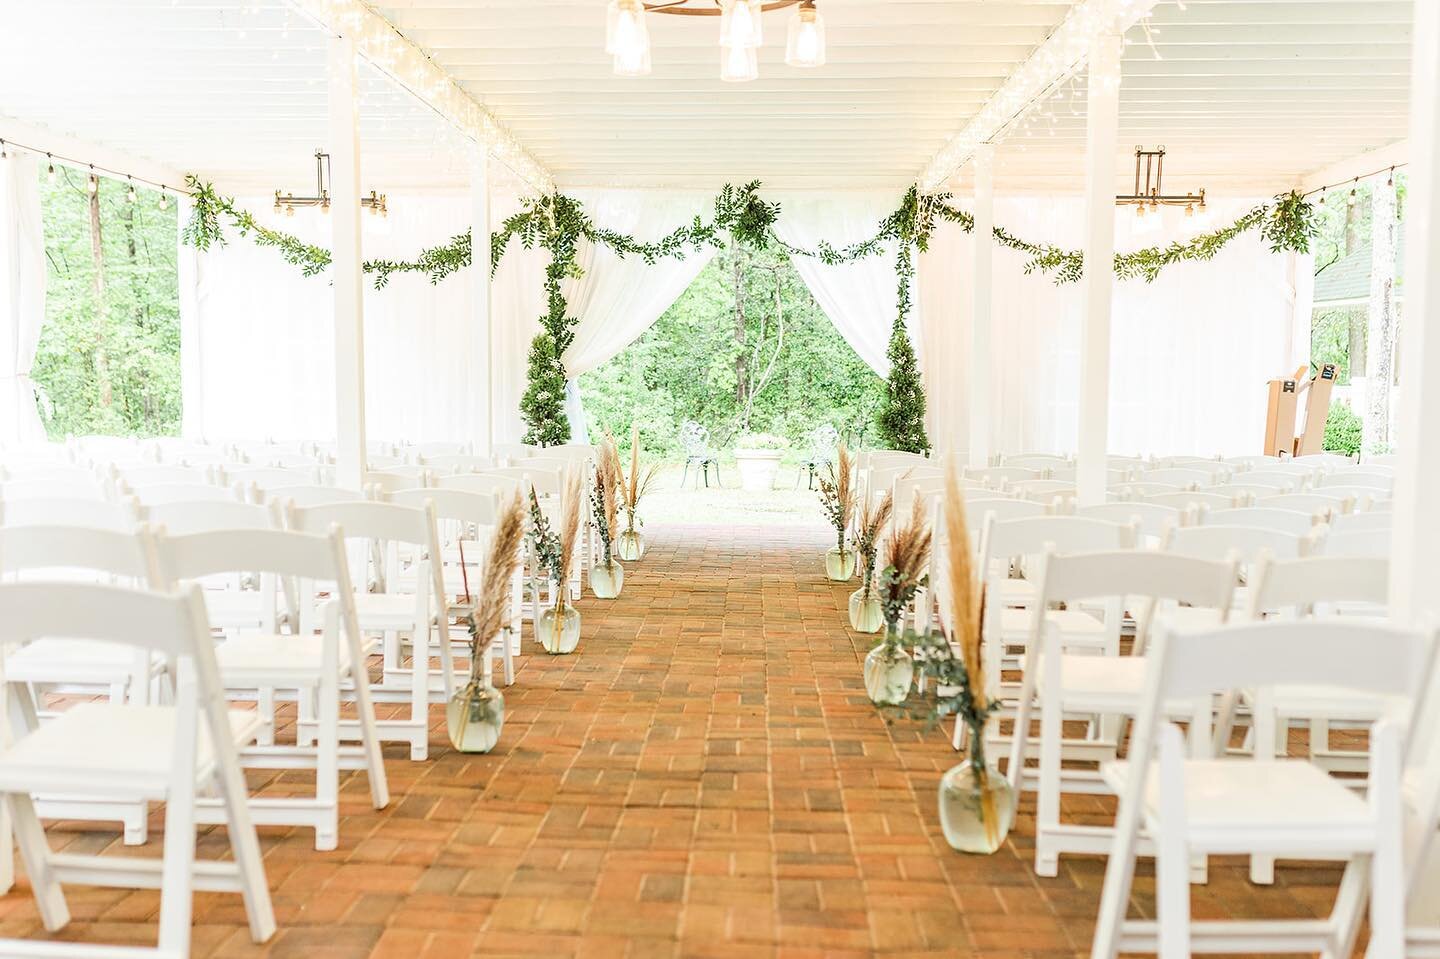 Over the winter, we extended our Magnolia Event Terrace and upgraded our lighting. This covered, open-air terrace can be used for a ceremony rain plan, cocktail hour, intimate wedding receptions and more! We love how Paul and Sami added greenery to t